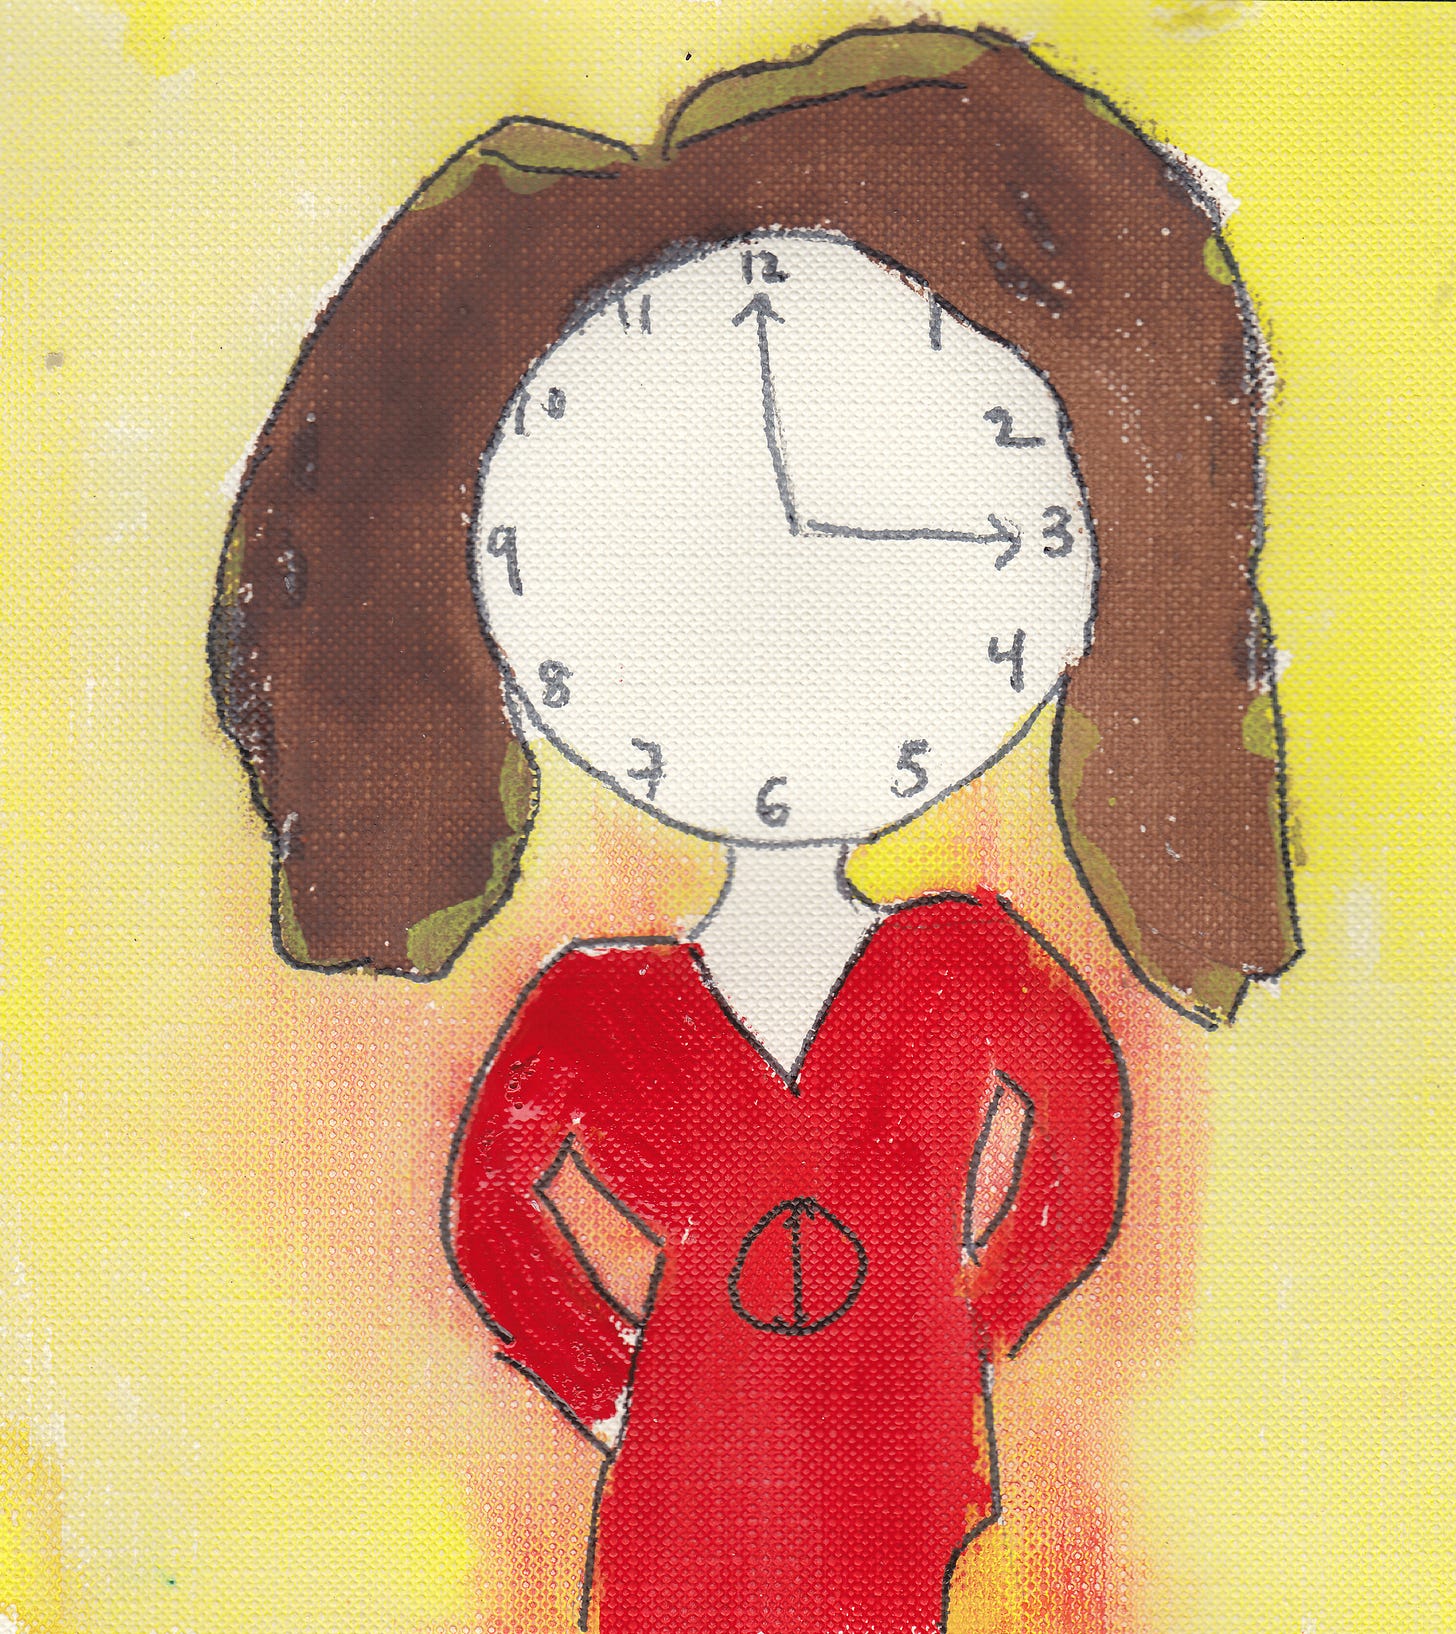 a Time Being with clock face. brown hair. TB wears a red dress with a clock on it. Yellow background